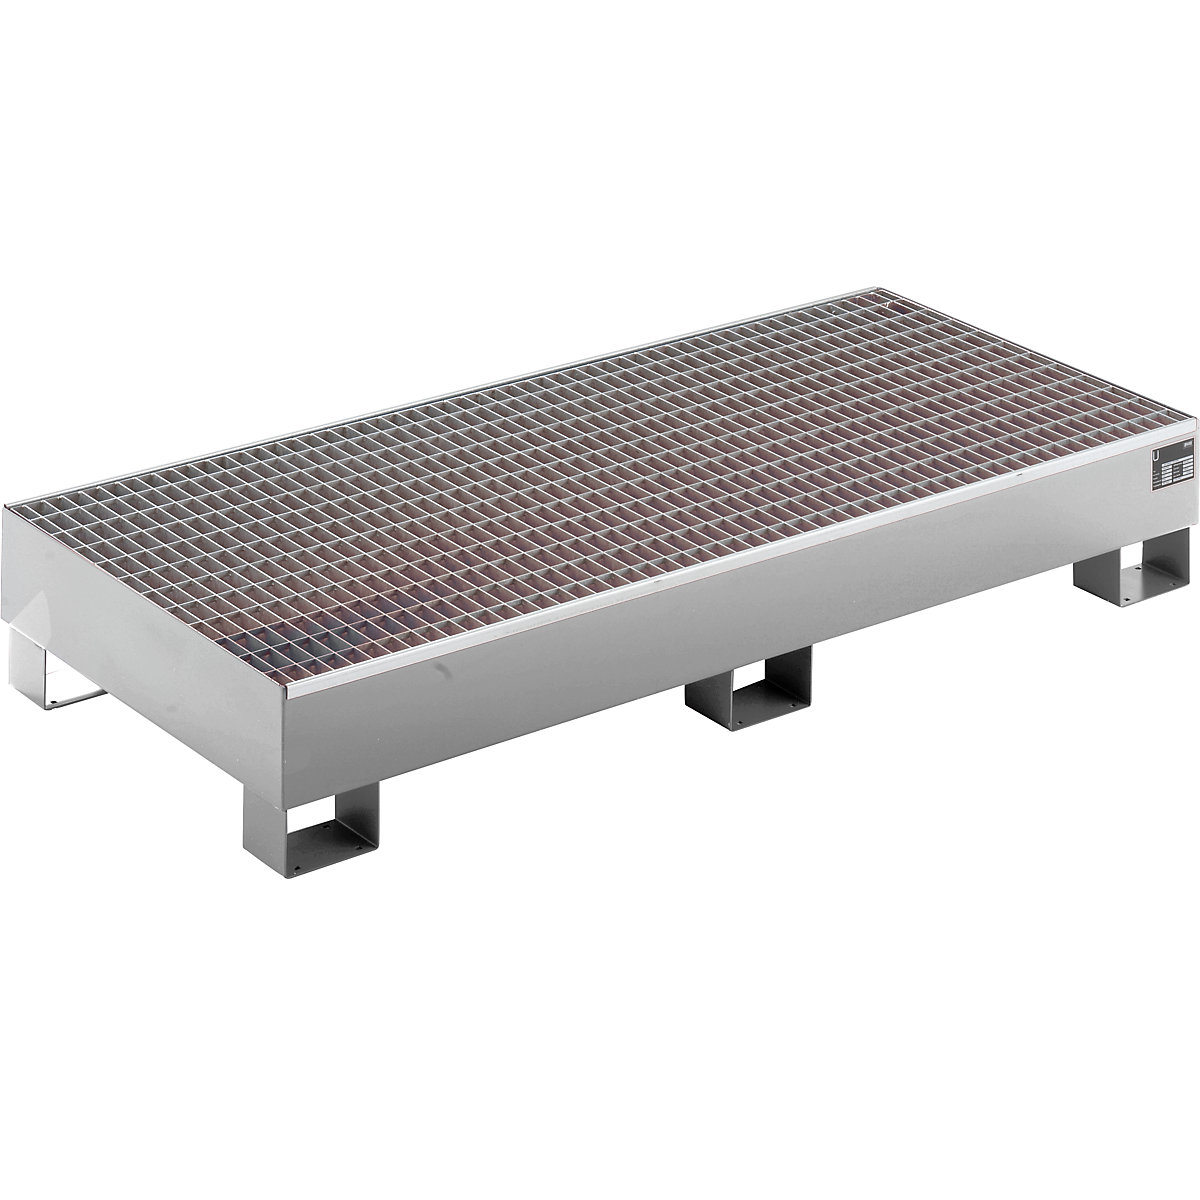 EUROKRAFTbasic – Sump tray made from sheet steel, LxWxH 1800 x 800 x 275 mm, hot dip galvanised, with grate